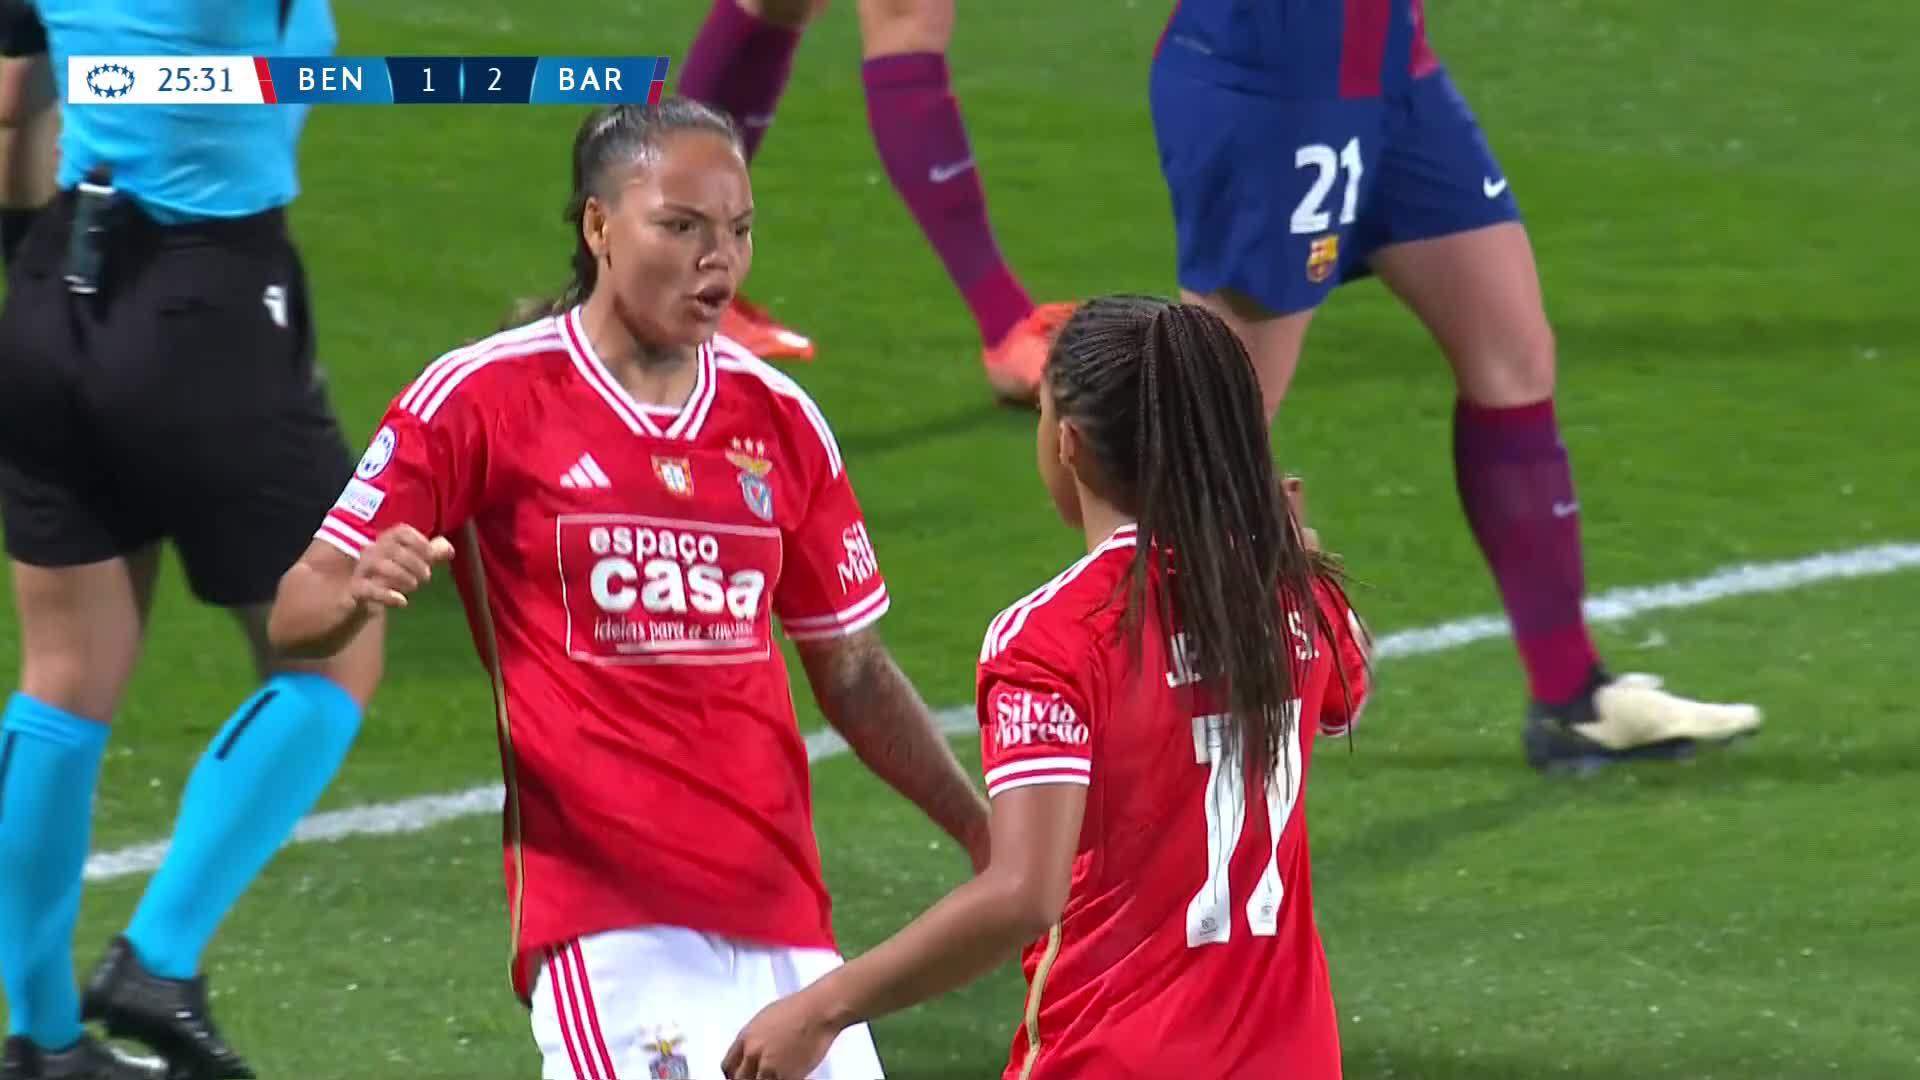 What a game we have here... Marie-Yasmine Alidou pulls one back! 👀Watch the UWCL LIVE for FREE on DAZN 👉  #UWCLonDAZN